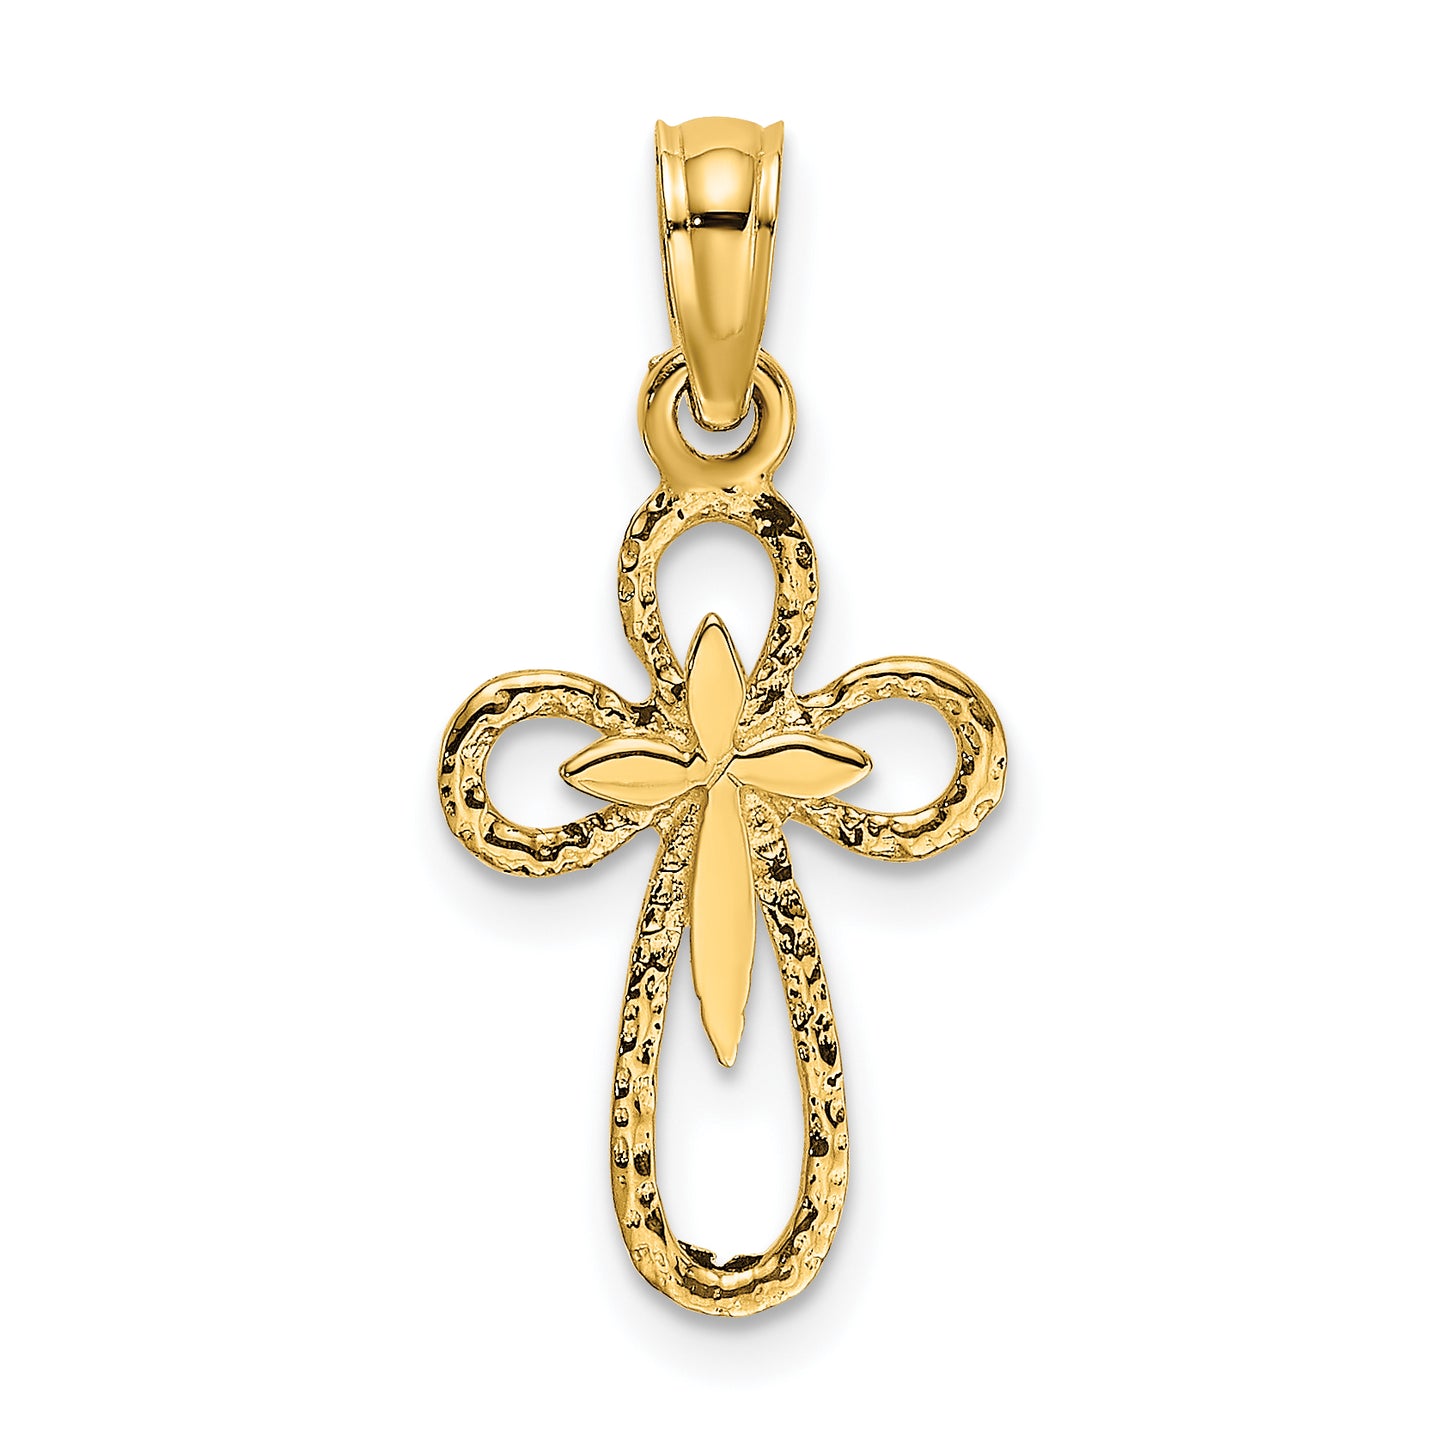 14K Cut-Out Cross with Small Interior Cross Charm